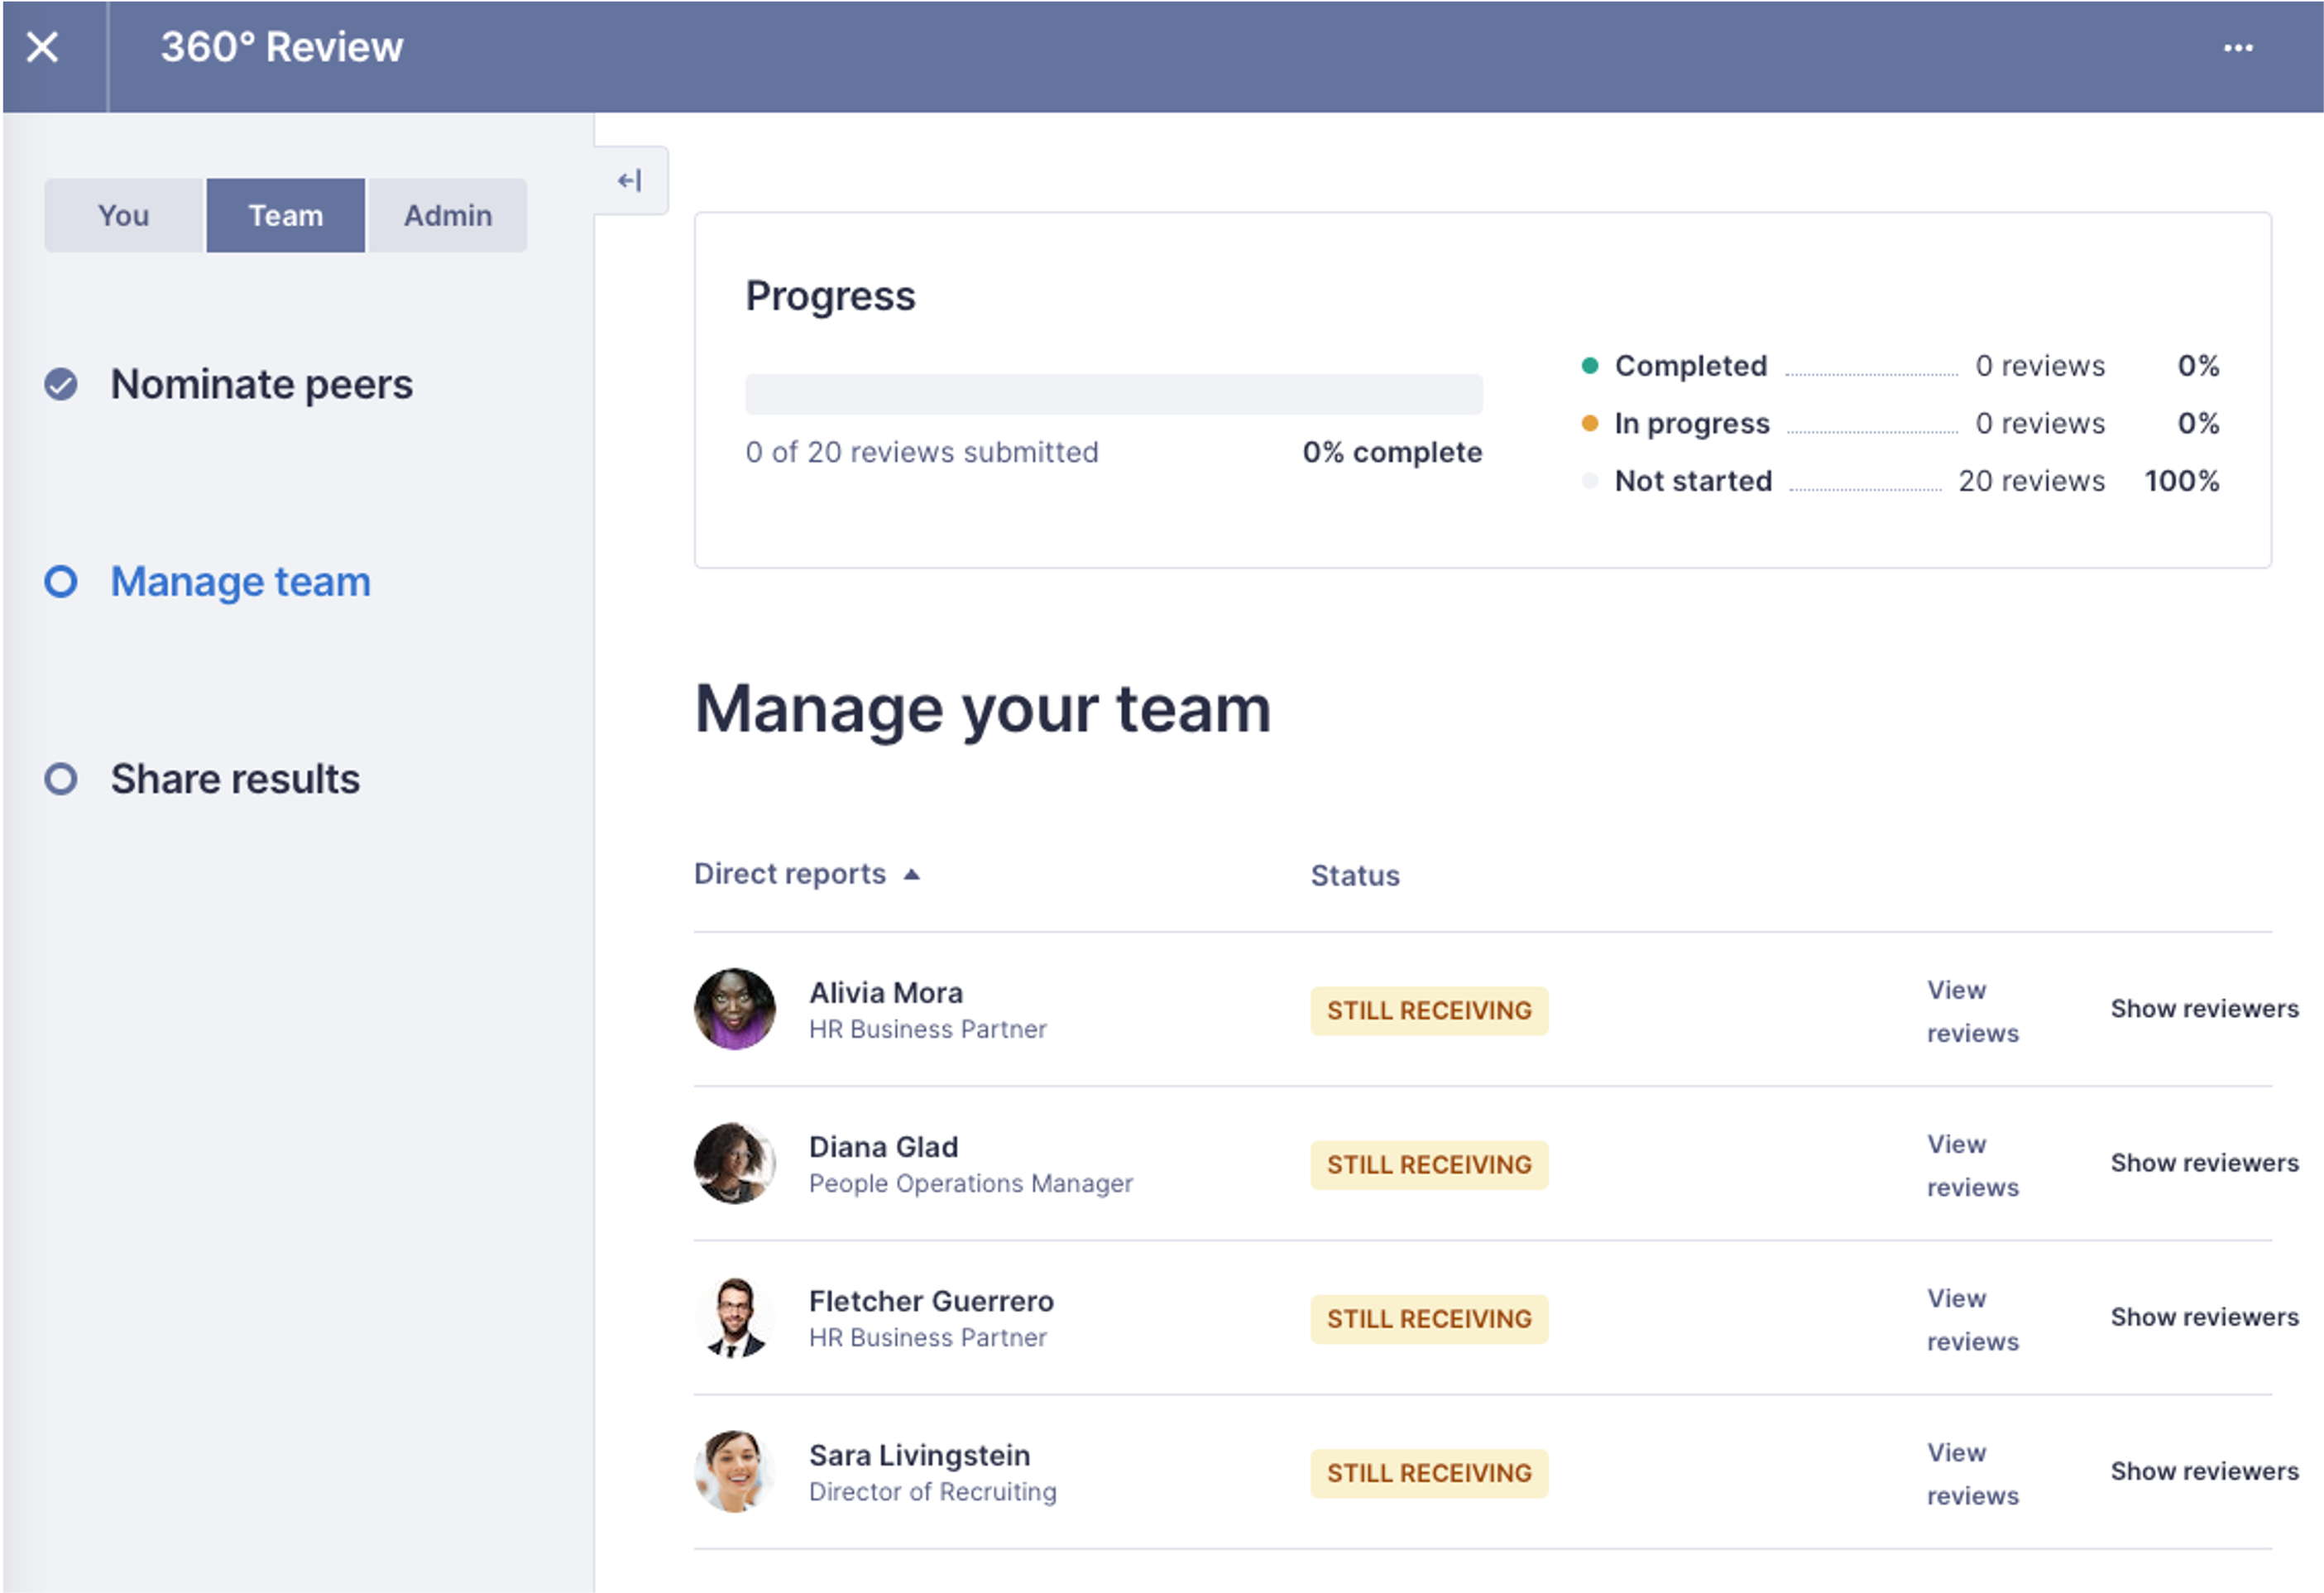 Unaltered screenshot of the Manage Team page in a review cycle showing team progress, team reviewees by status, and left side navigation options